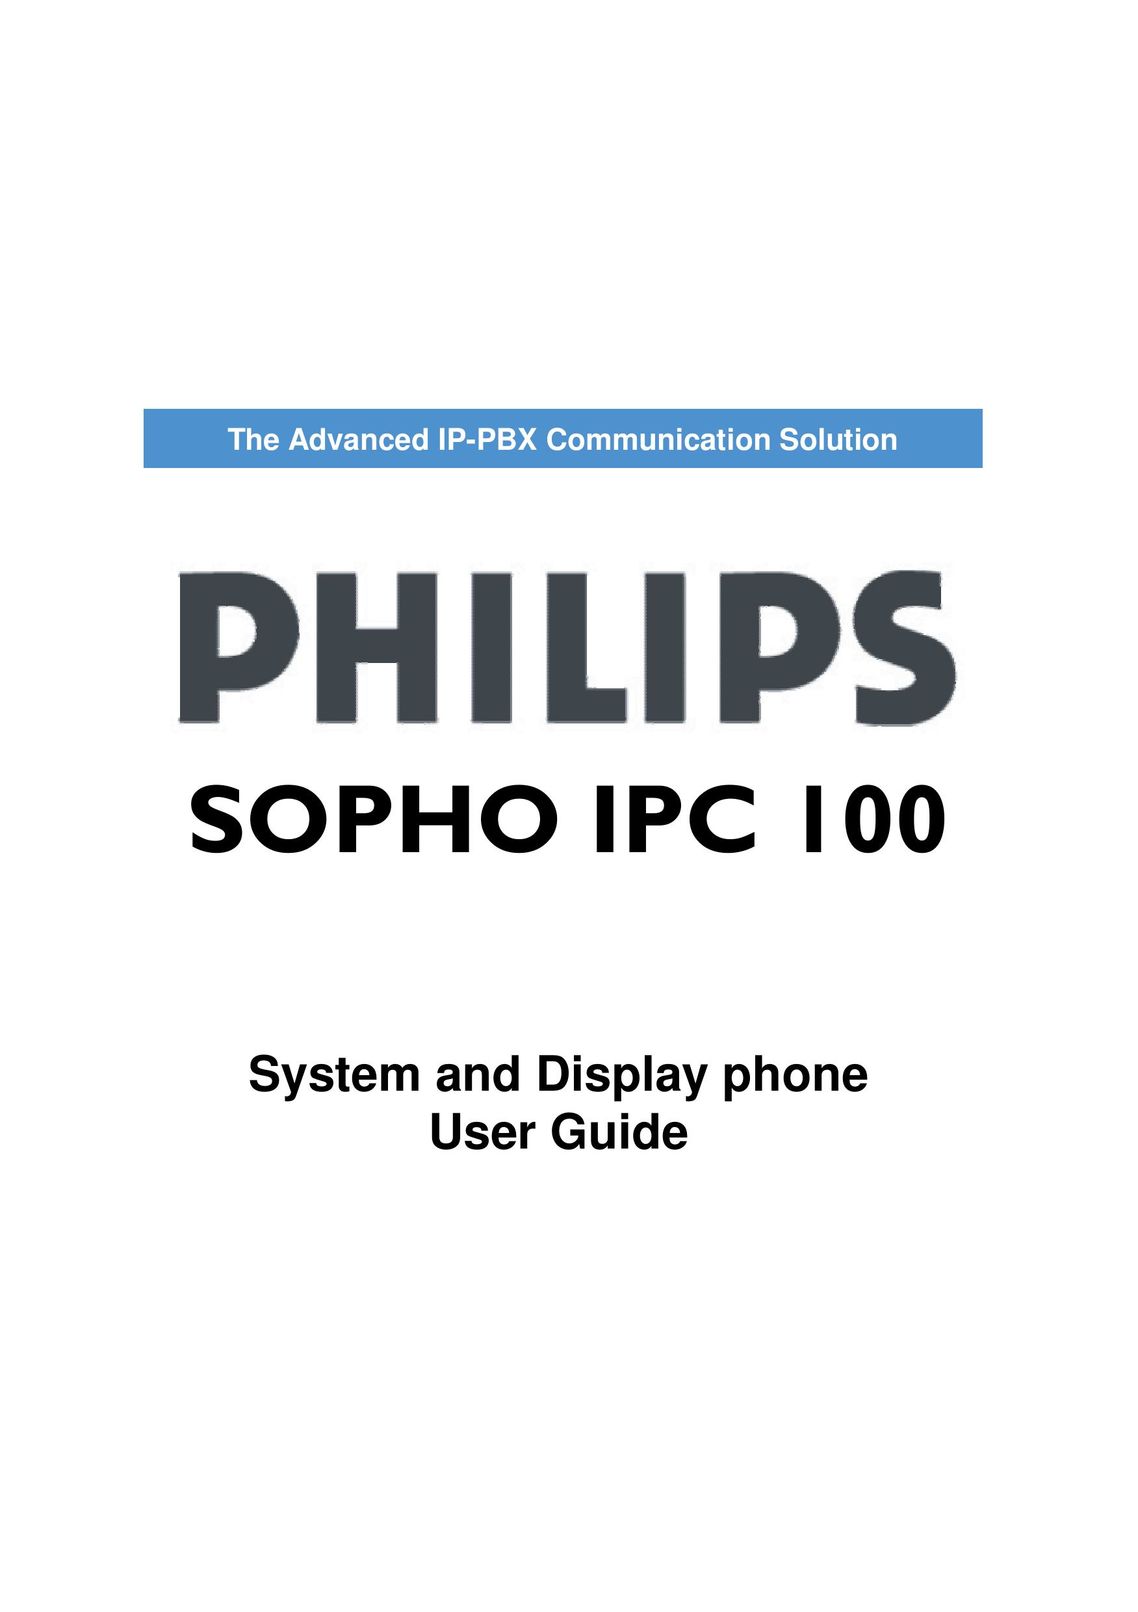 Porter-Cable SOPHO IPC 100 Telephone User Manual